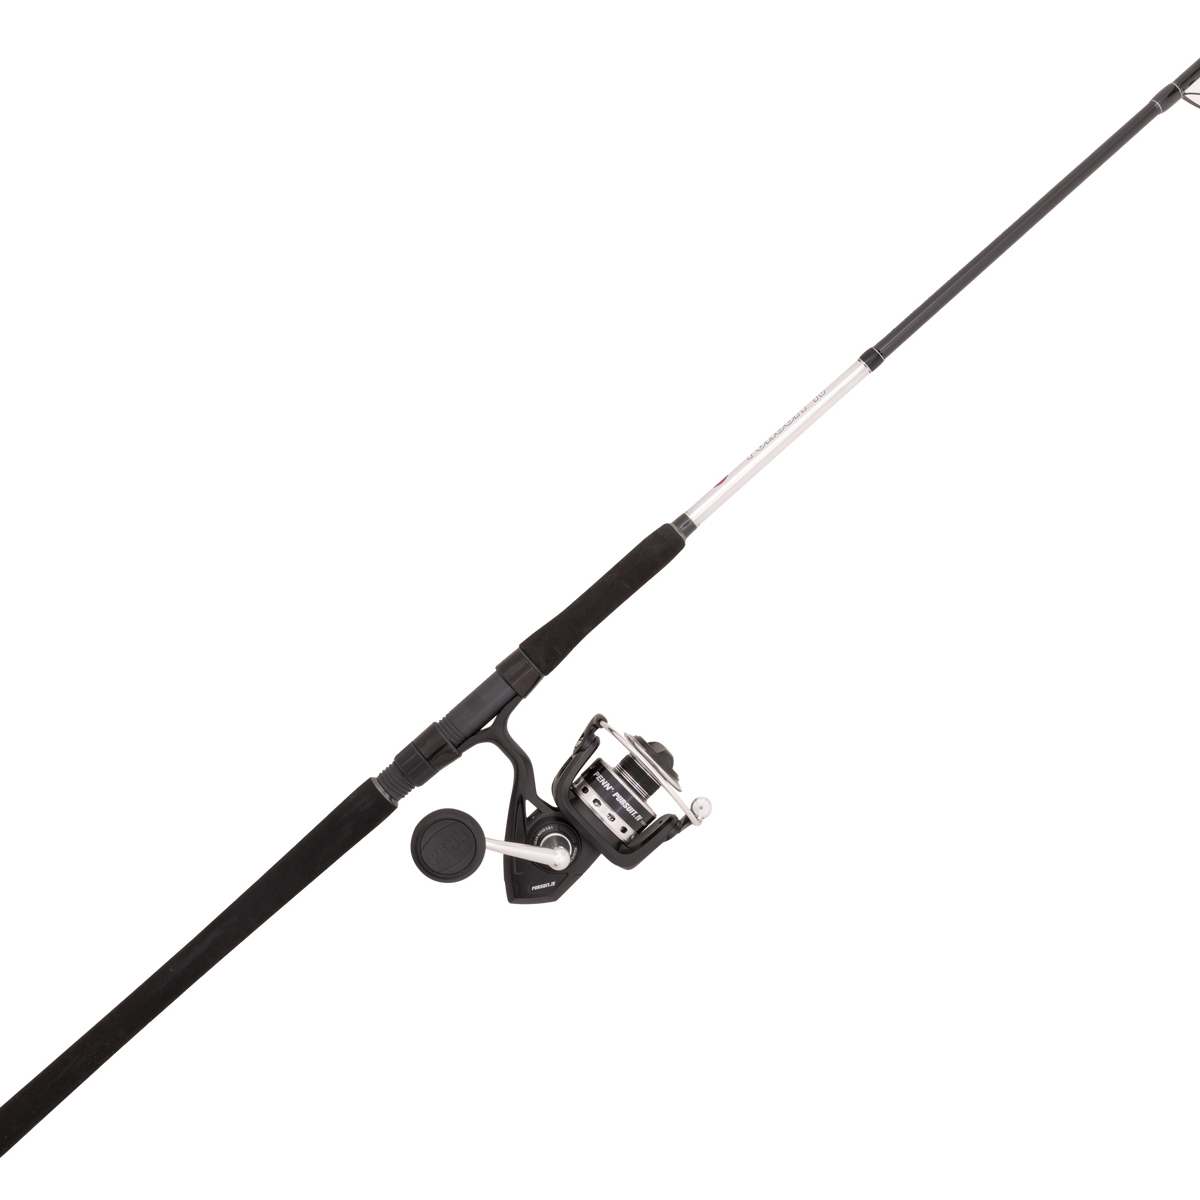 https://www.smartmarine.co.nz/cdn/images/products/xlarge/8080094_pursuit_iv_5000_pur-s_641mh_10-15kg_combo.jpg